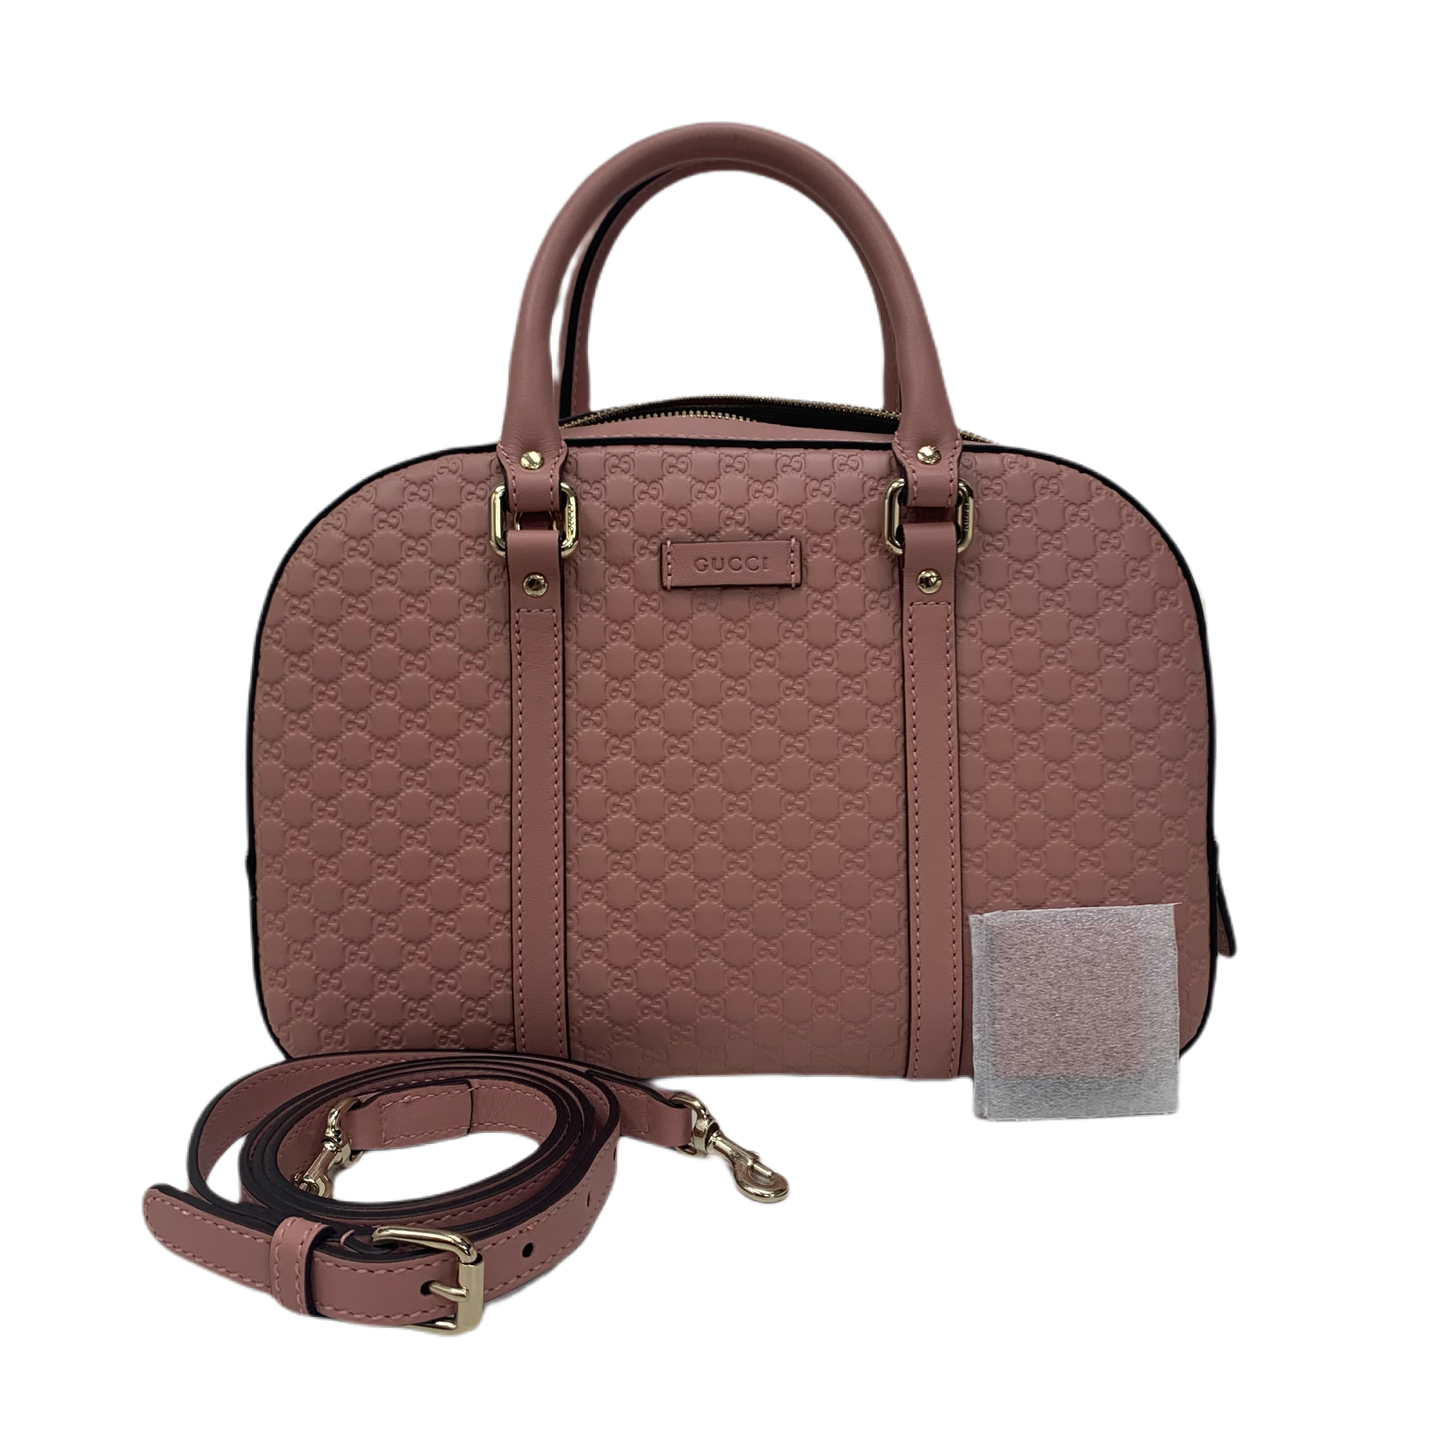 Gucci Pink Leather Embossed Satchel